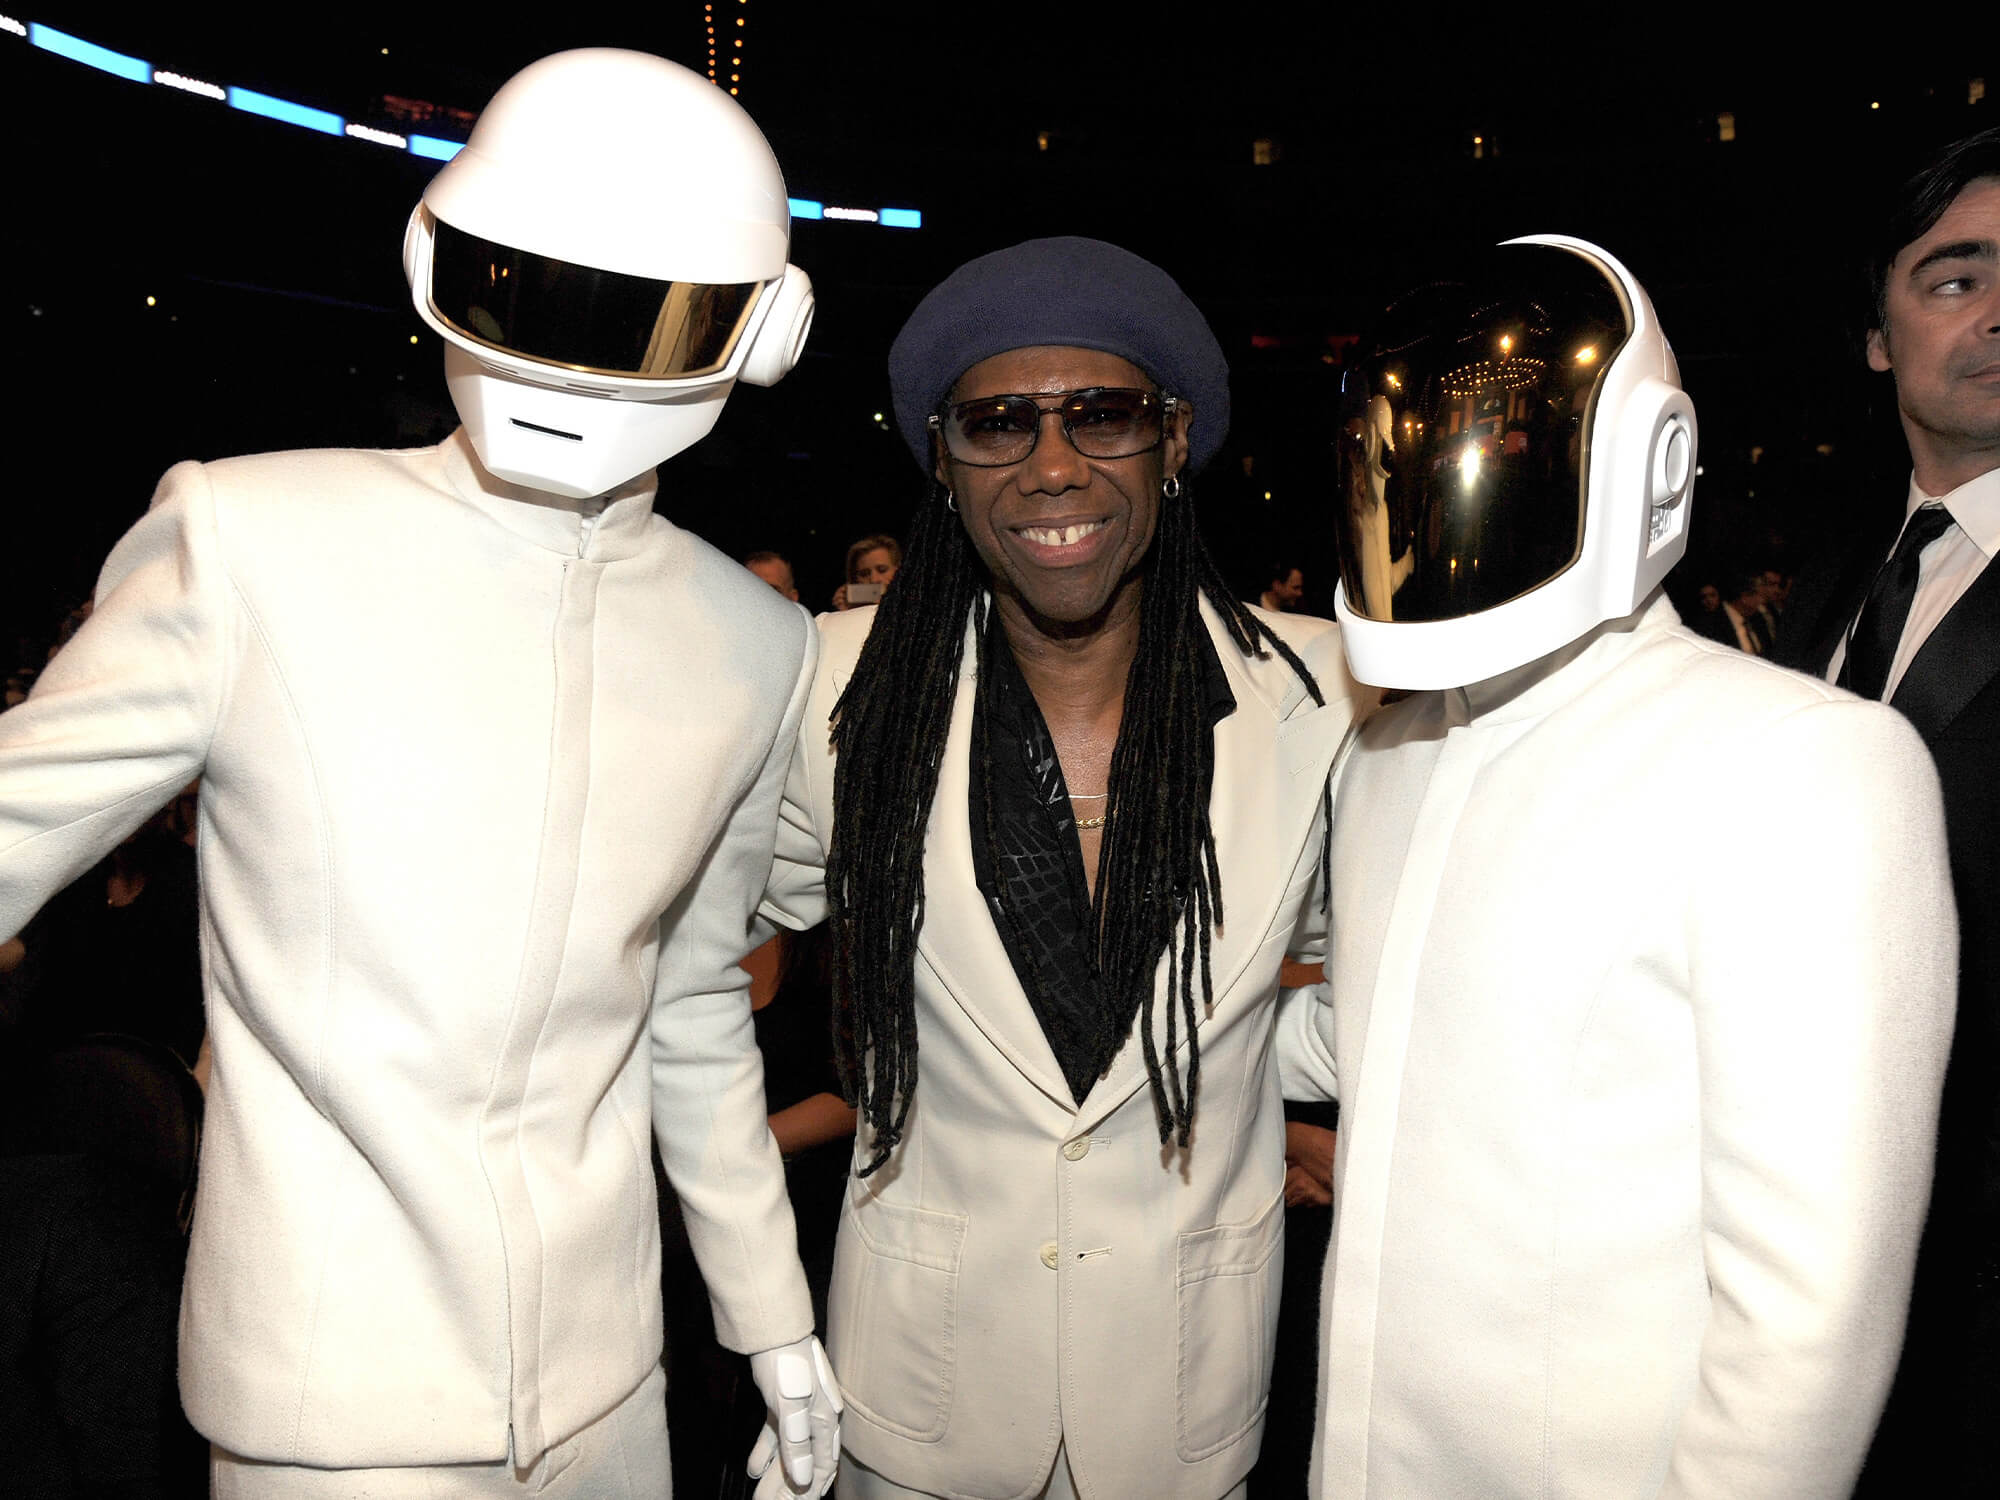 Nile Rogers stood in-between Daft Punk. All three are wearing white suits. Daft Punk are wearing their famous futuristic helmets.